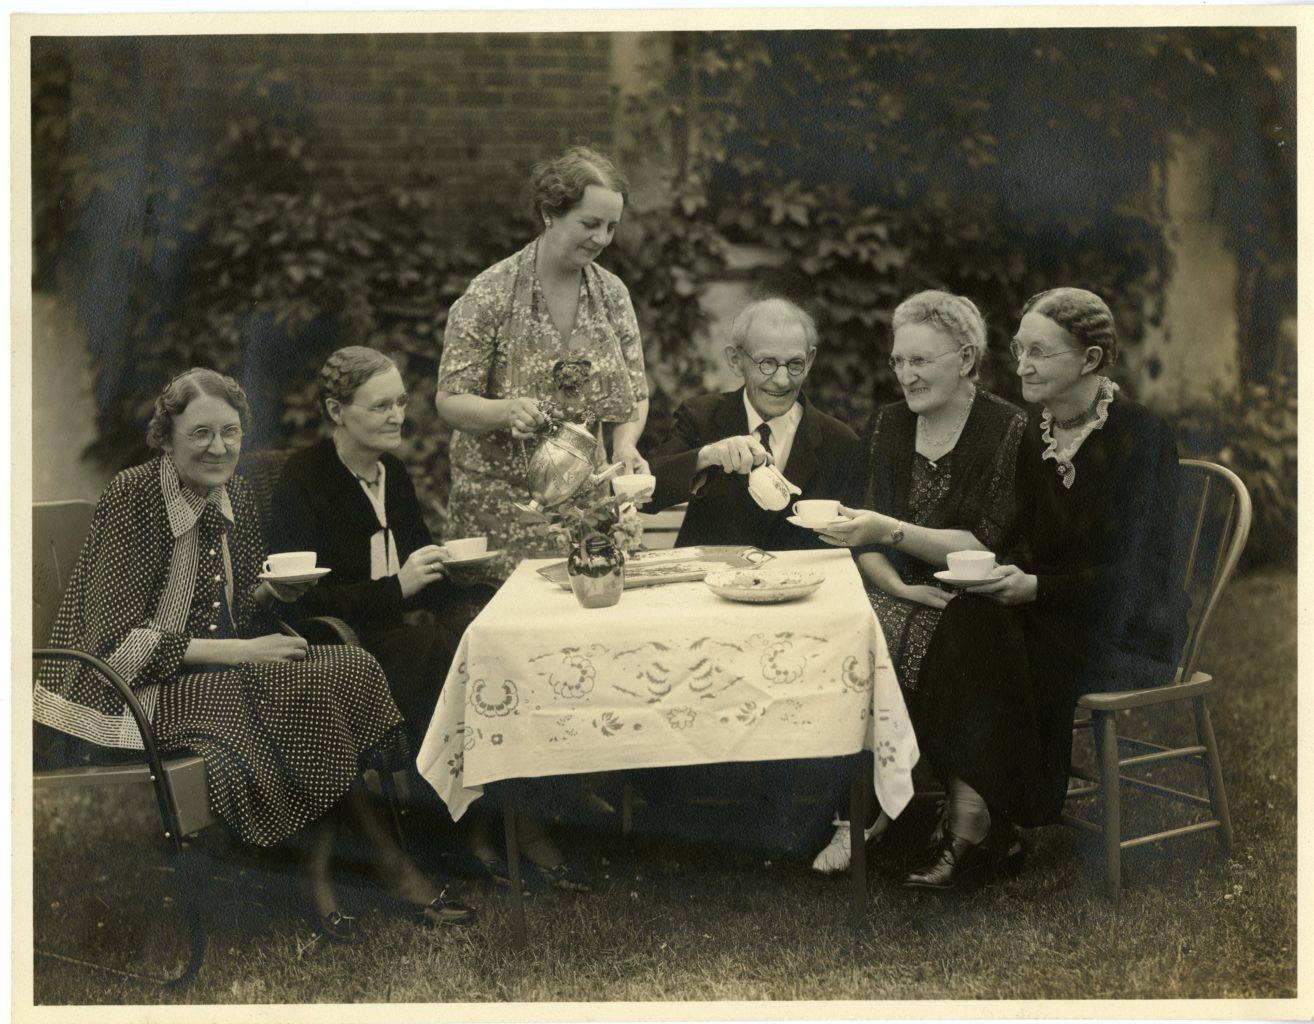 Five women and on man gather for tea outside around a table.